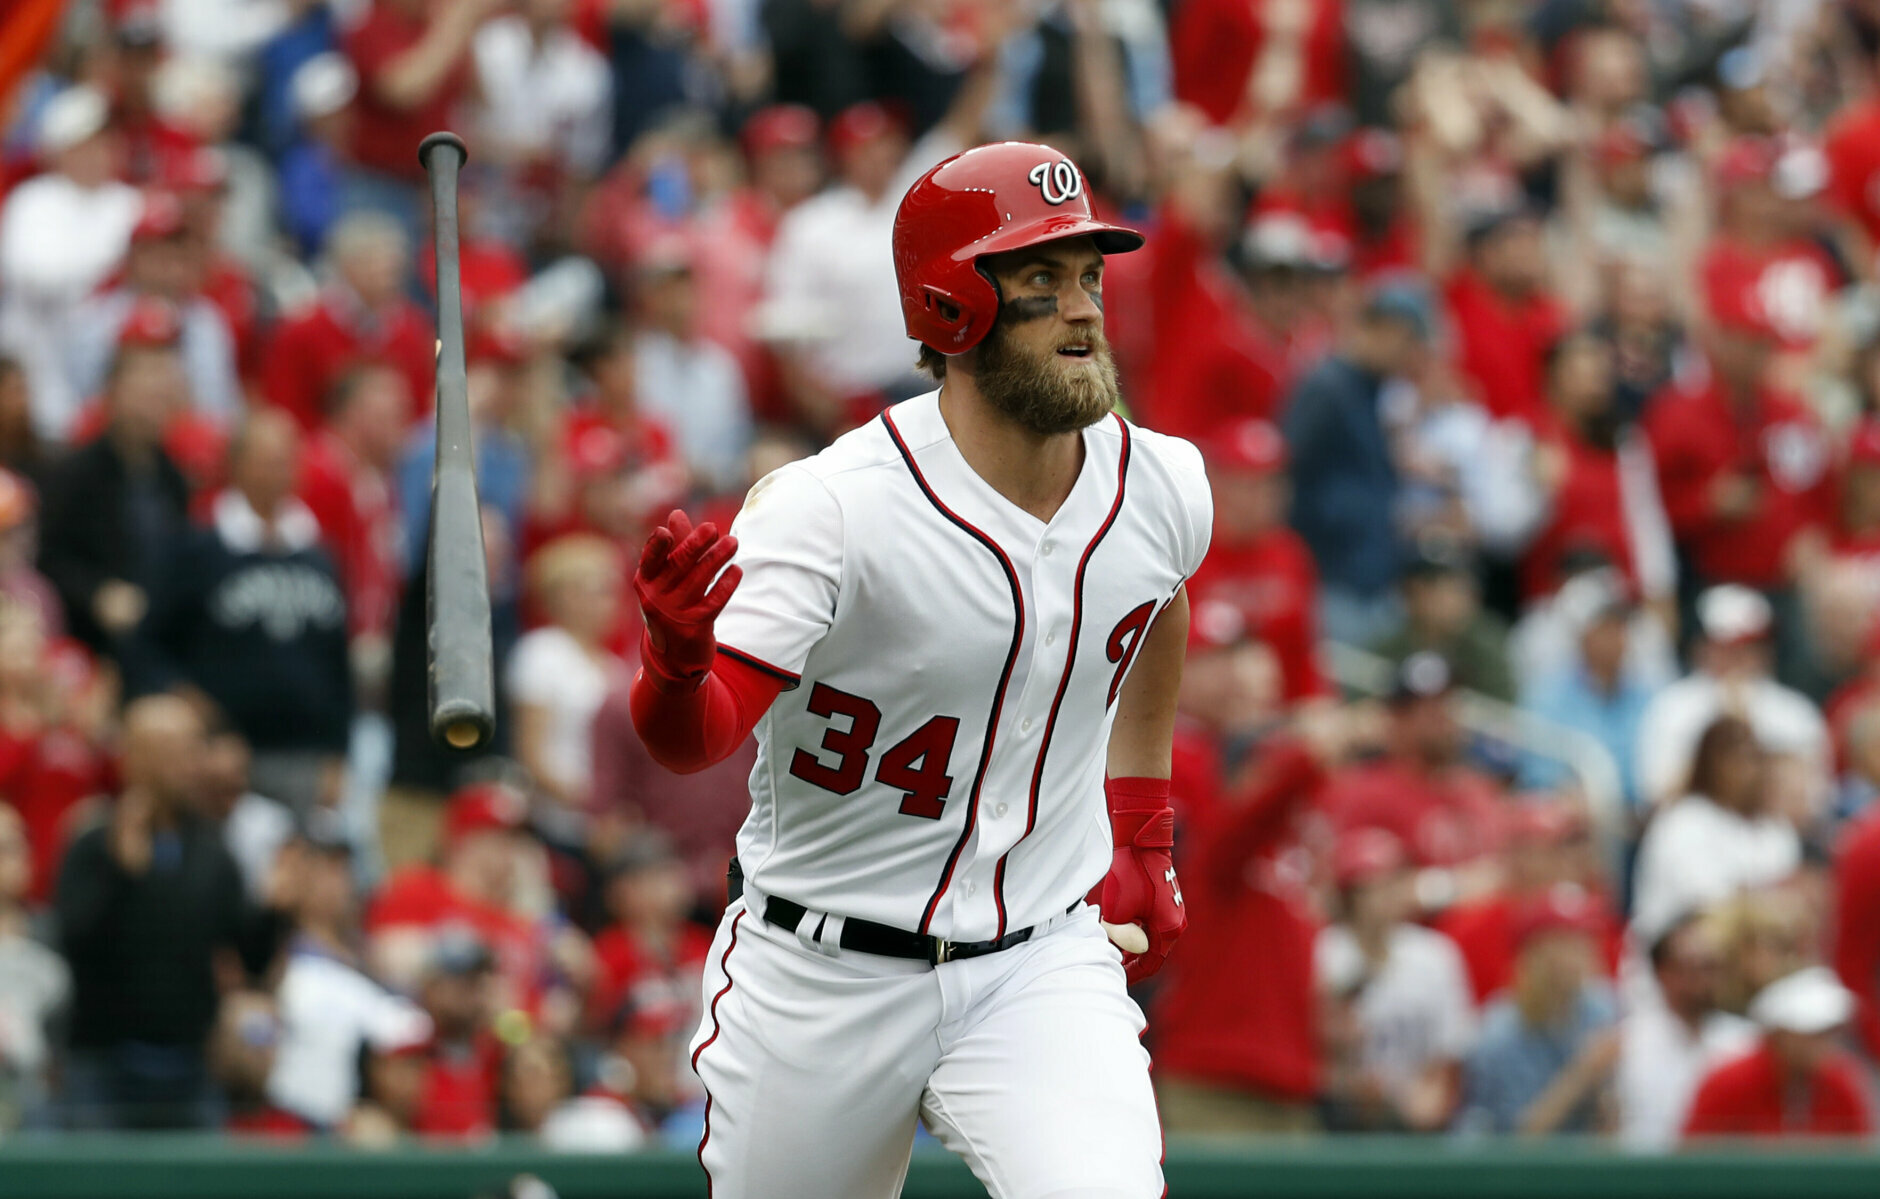 Washington Nationals' Bryce Harper flips his bat as he watches his solo home run during the sixth inning of an opening day baseball game against the Miami Marlins, at Nationals Park, Monday, April 3, 2017, in Washington. (AP Photo/Alex Brandon)